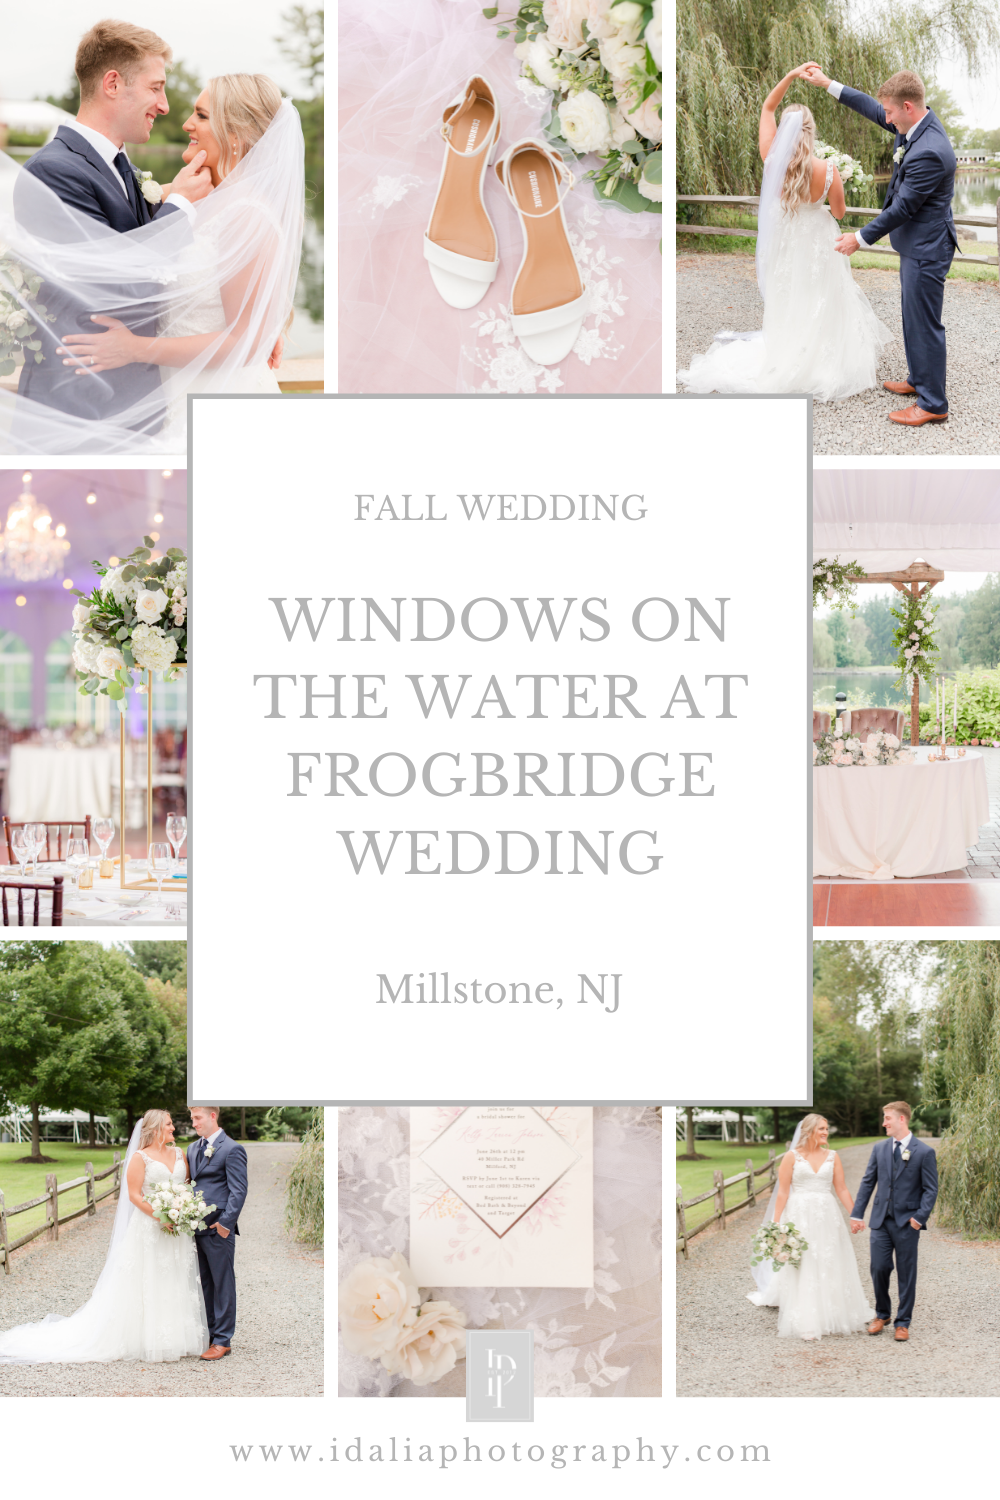 romantic fall wedding at the Windows on the Water at Frogbridge